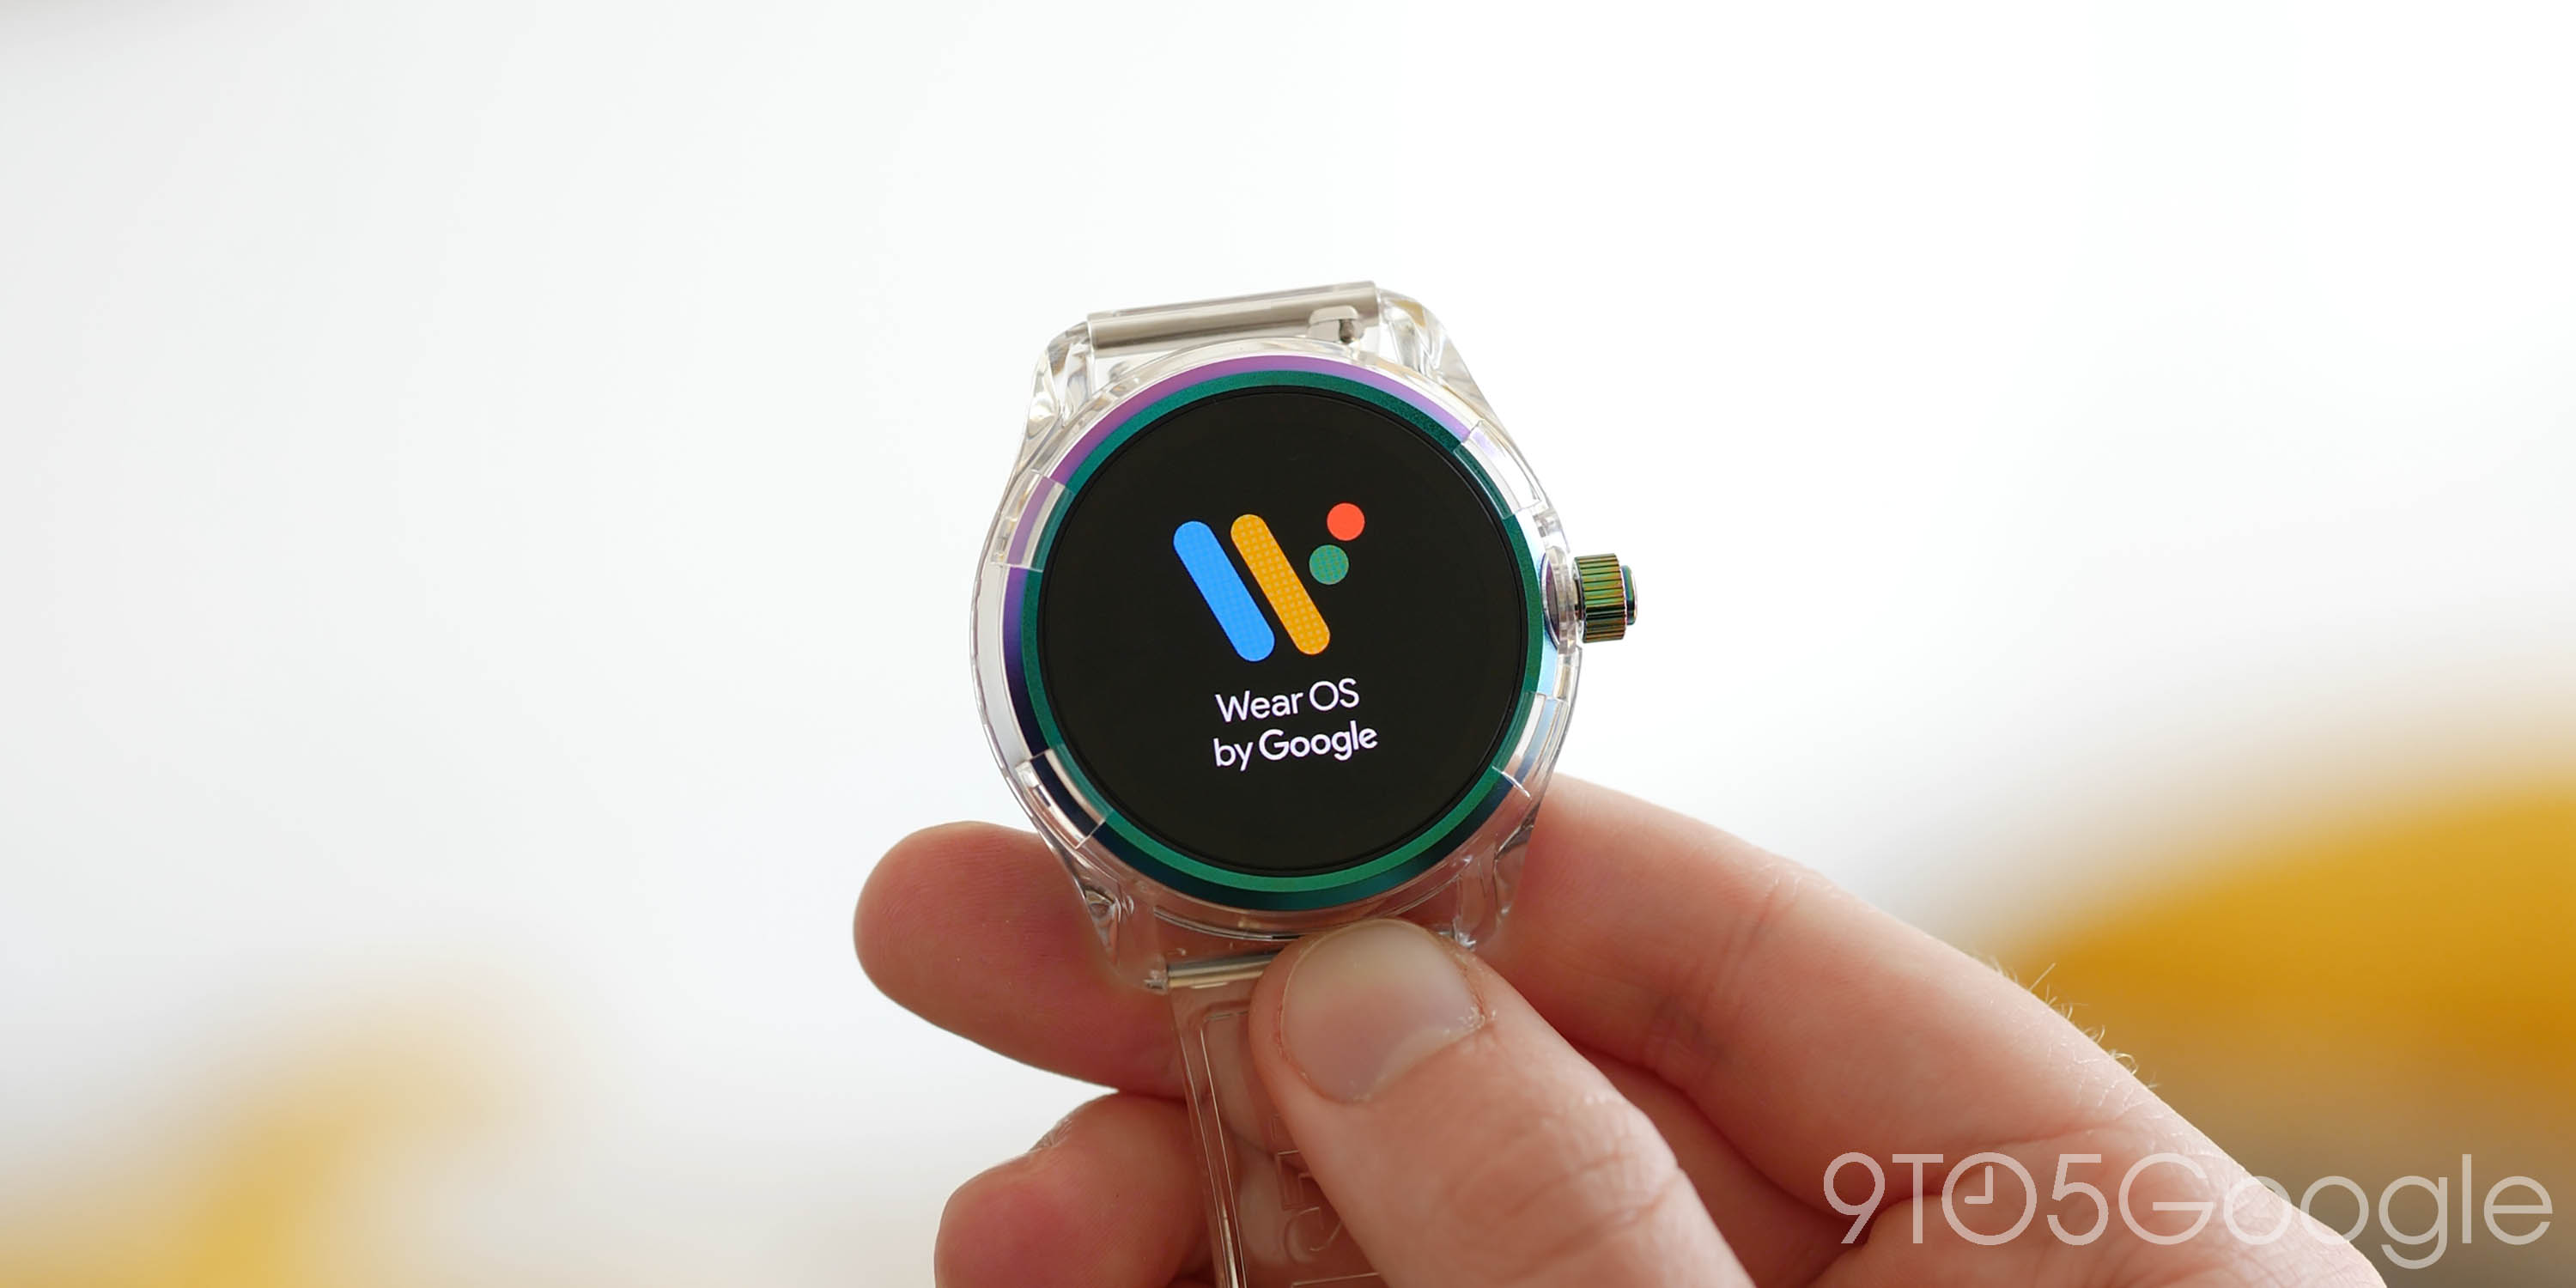 What is Wear OS?